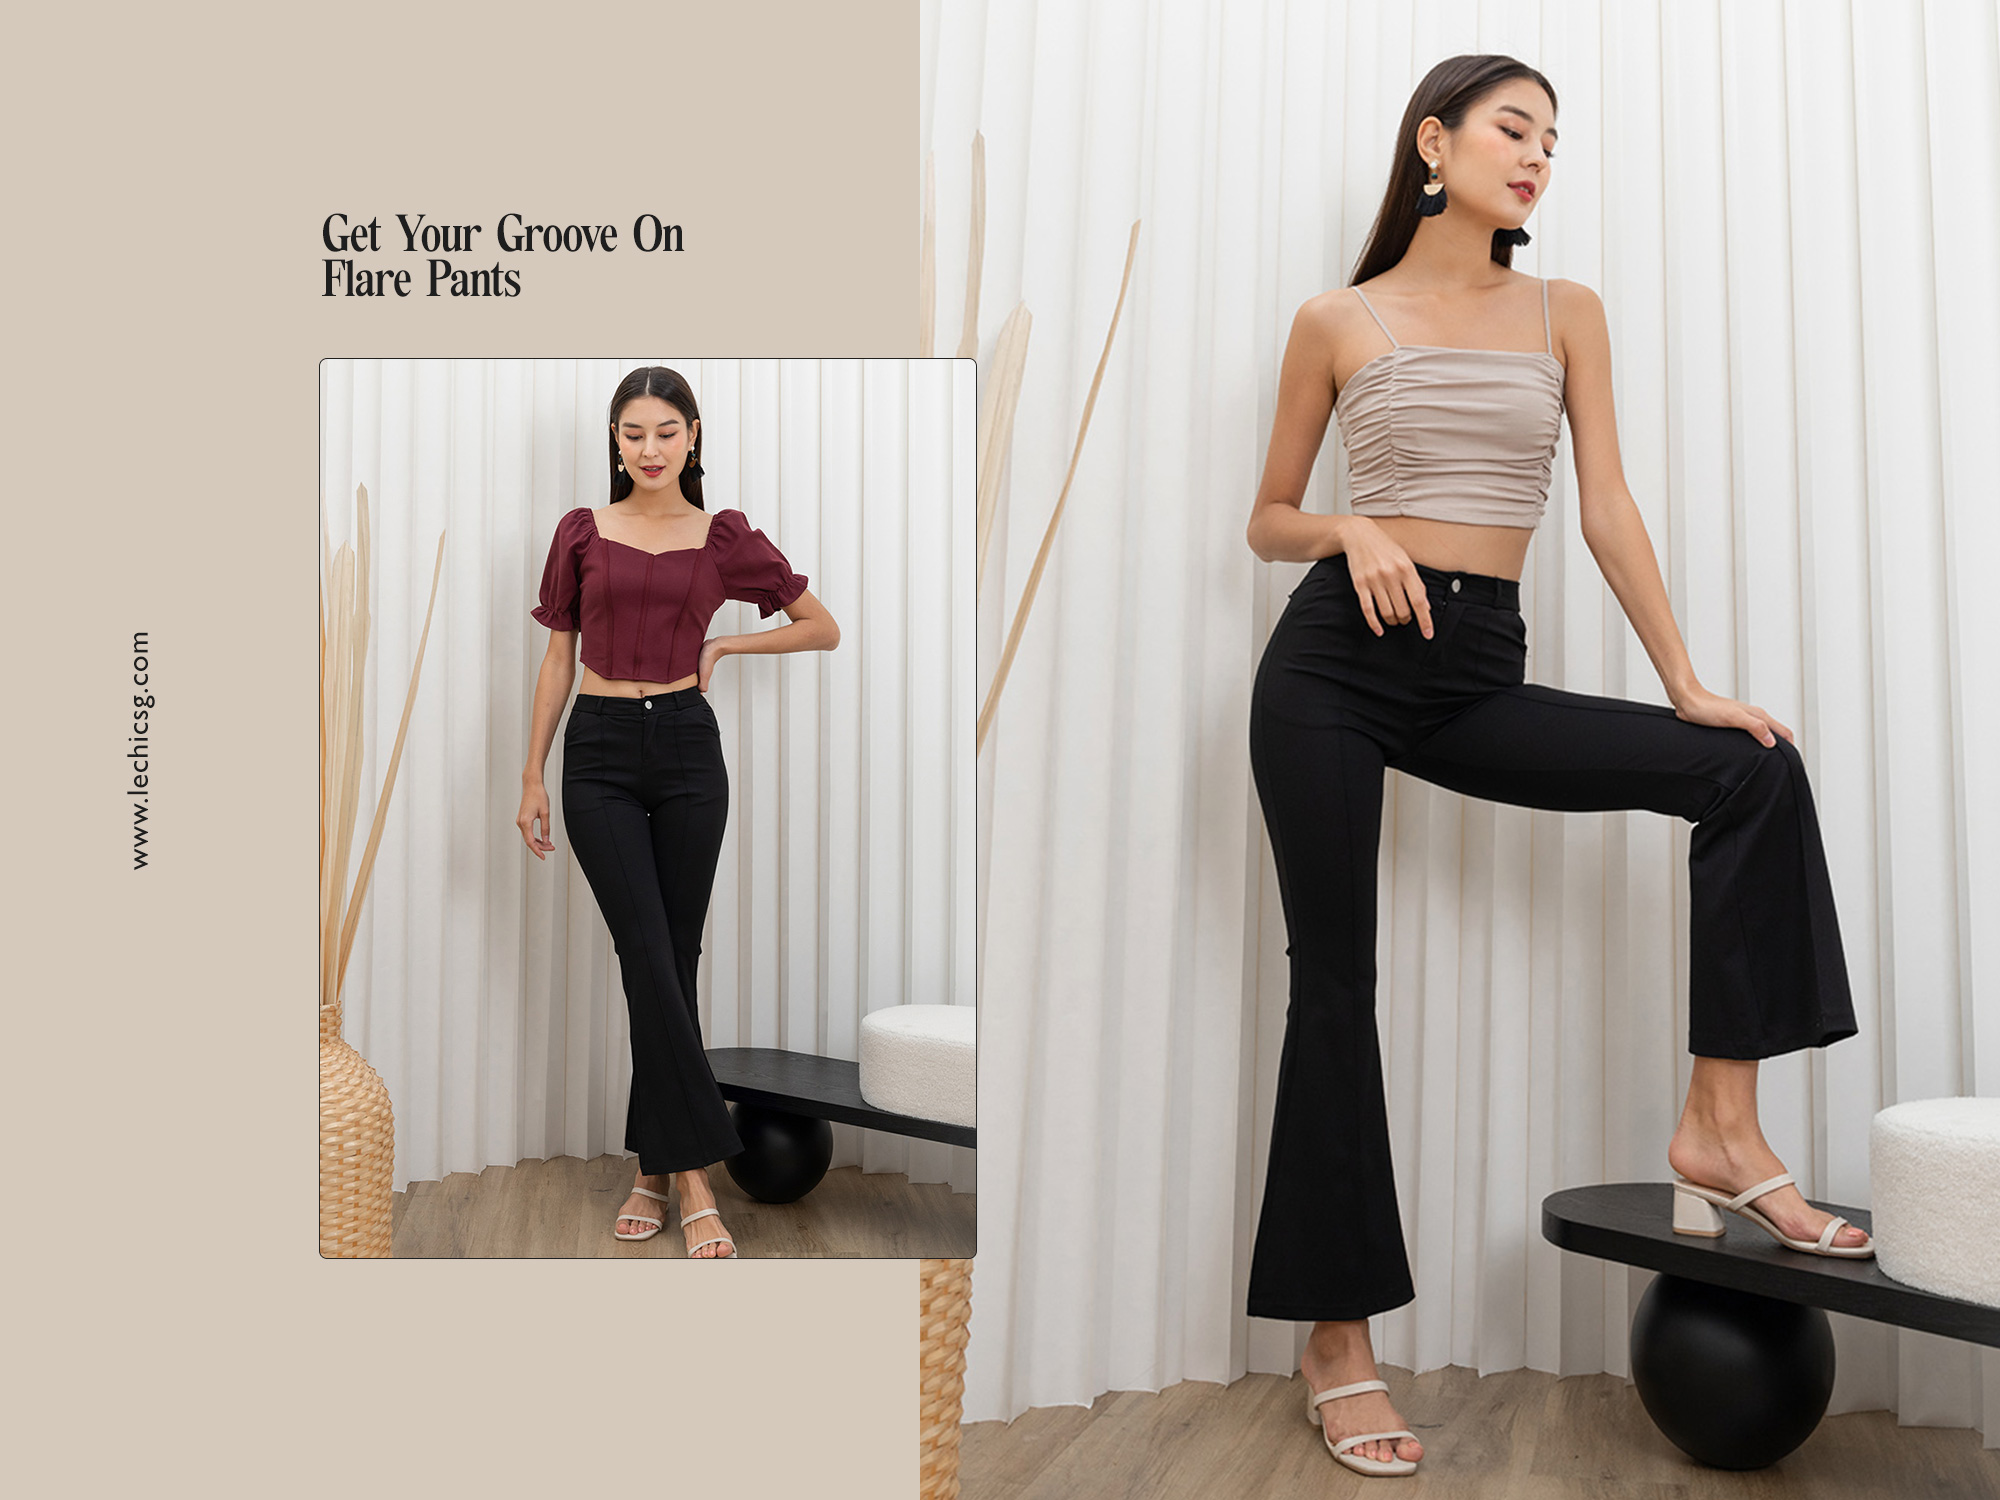 Get Your Groove On Flare Pants